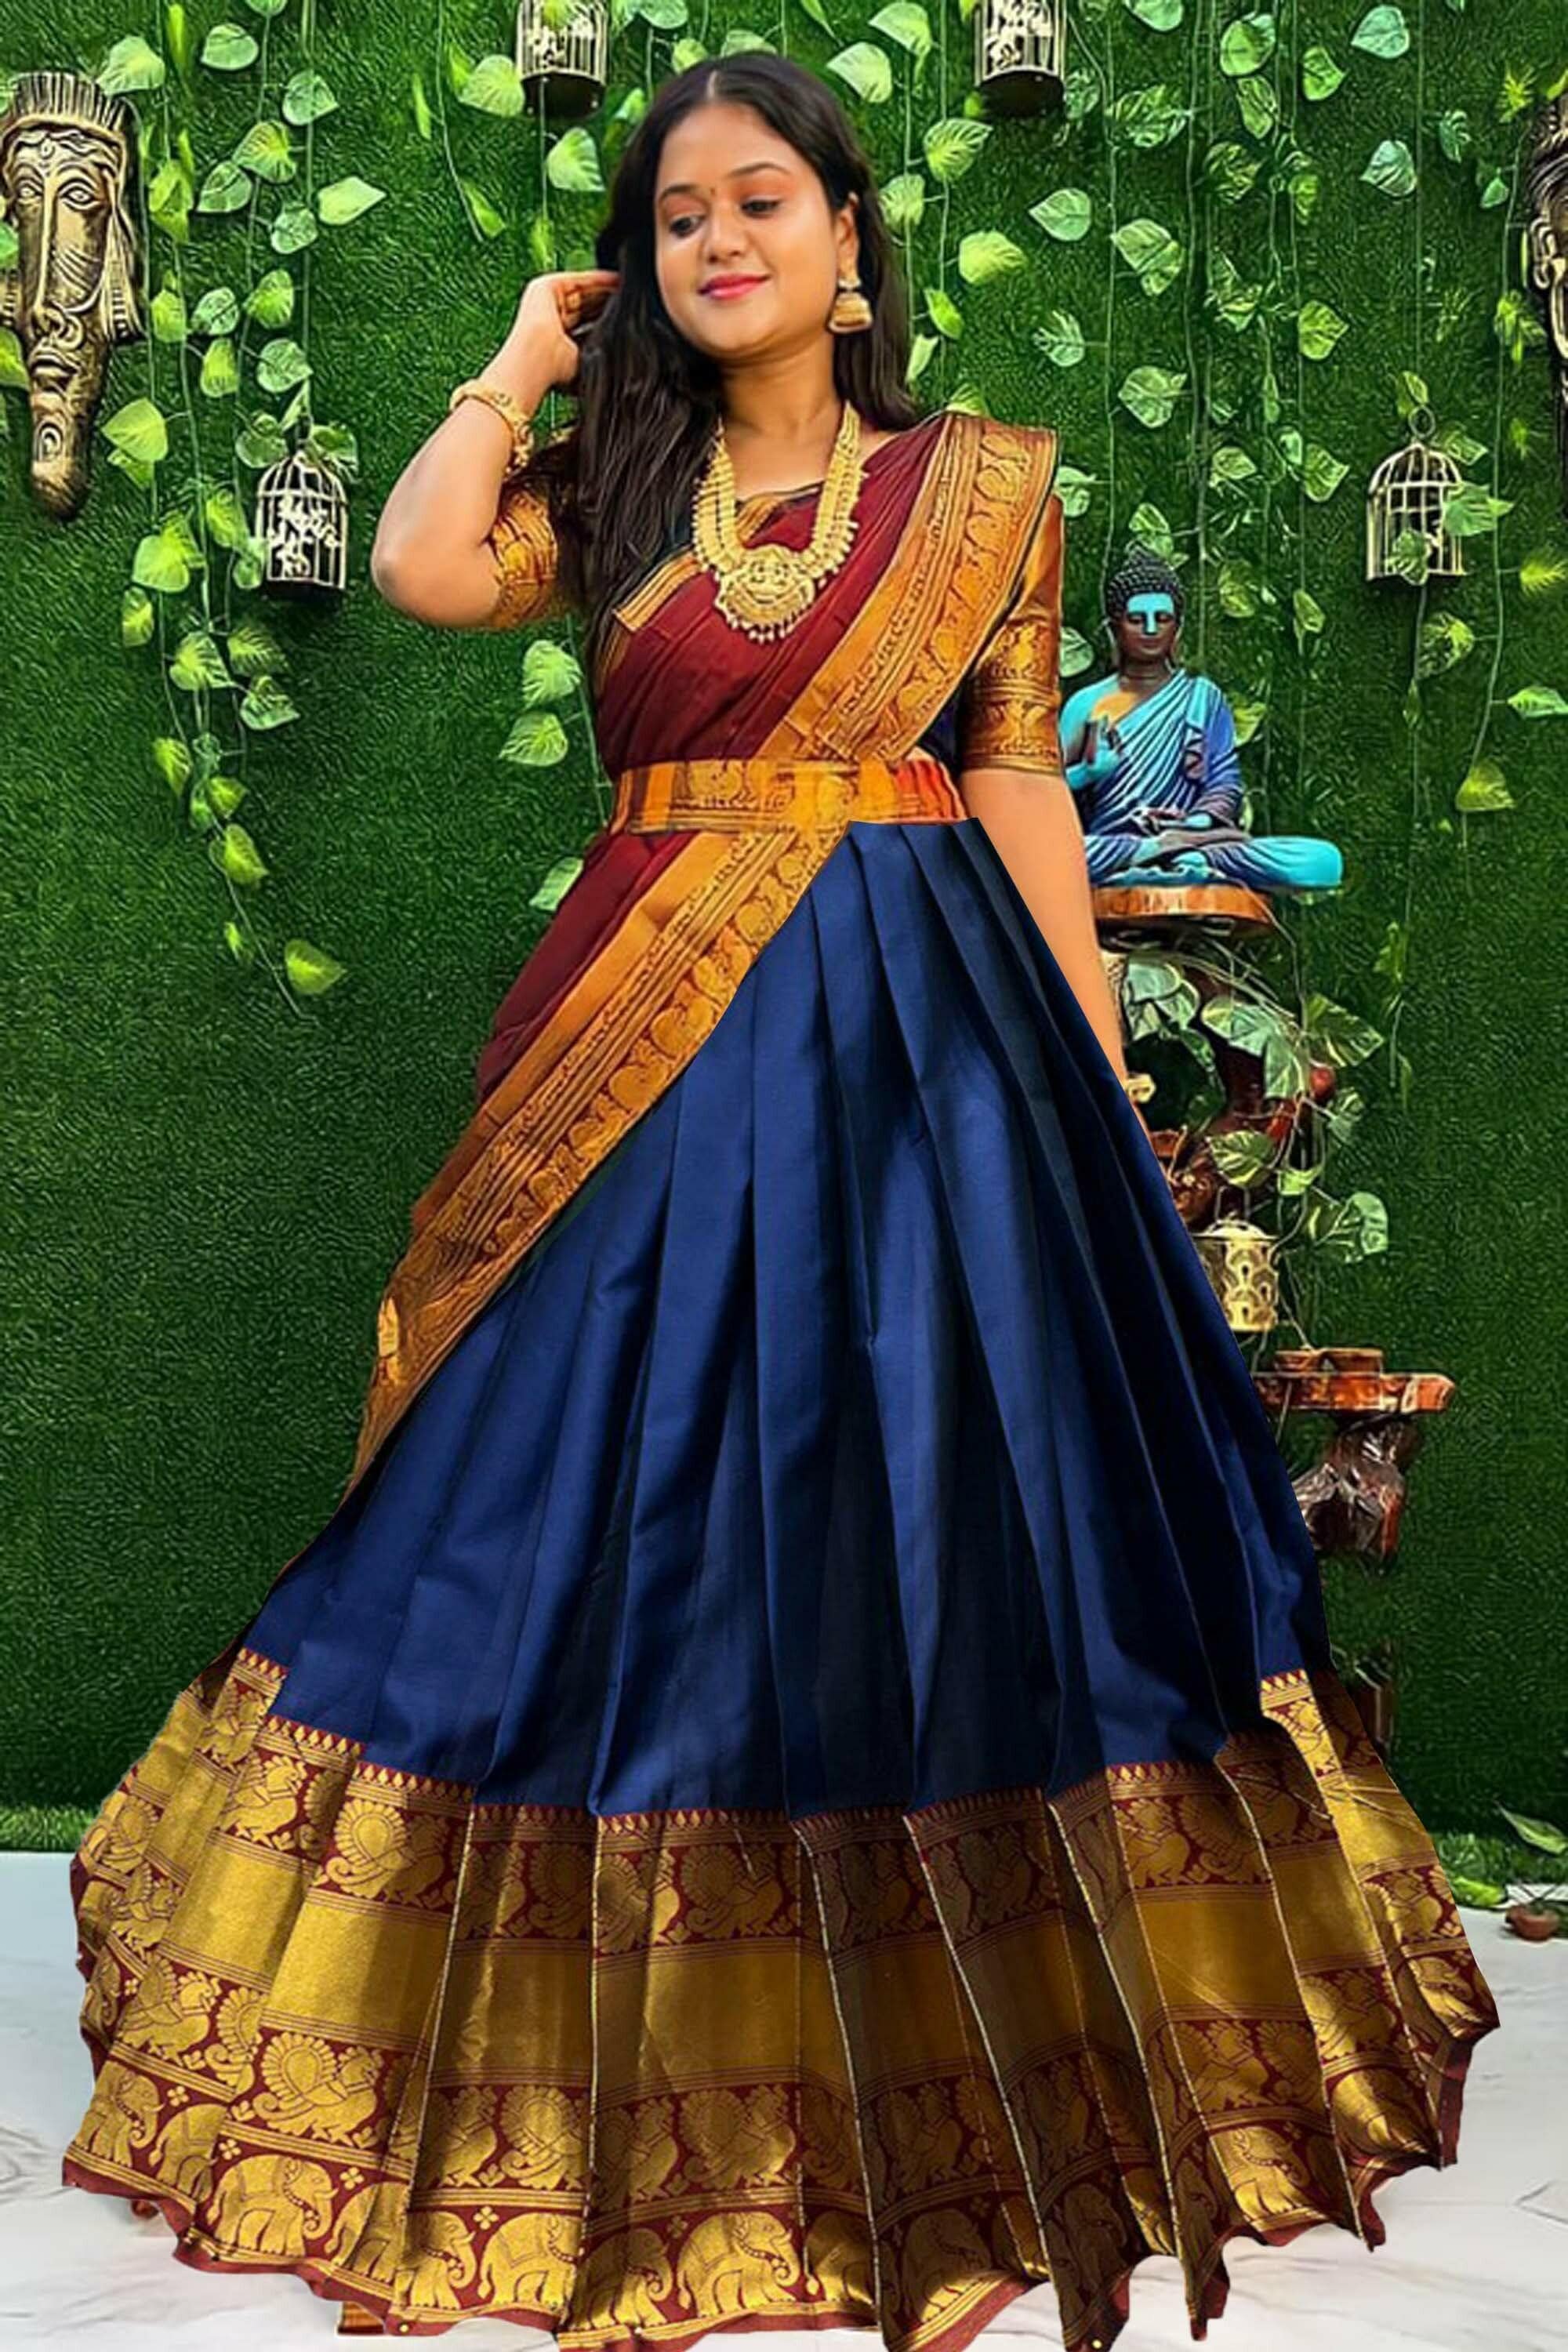 South Indian Wedding Saree for Traditional Bride - K4 Fashion